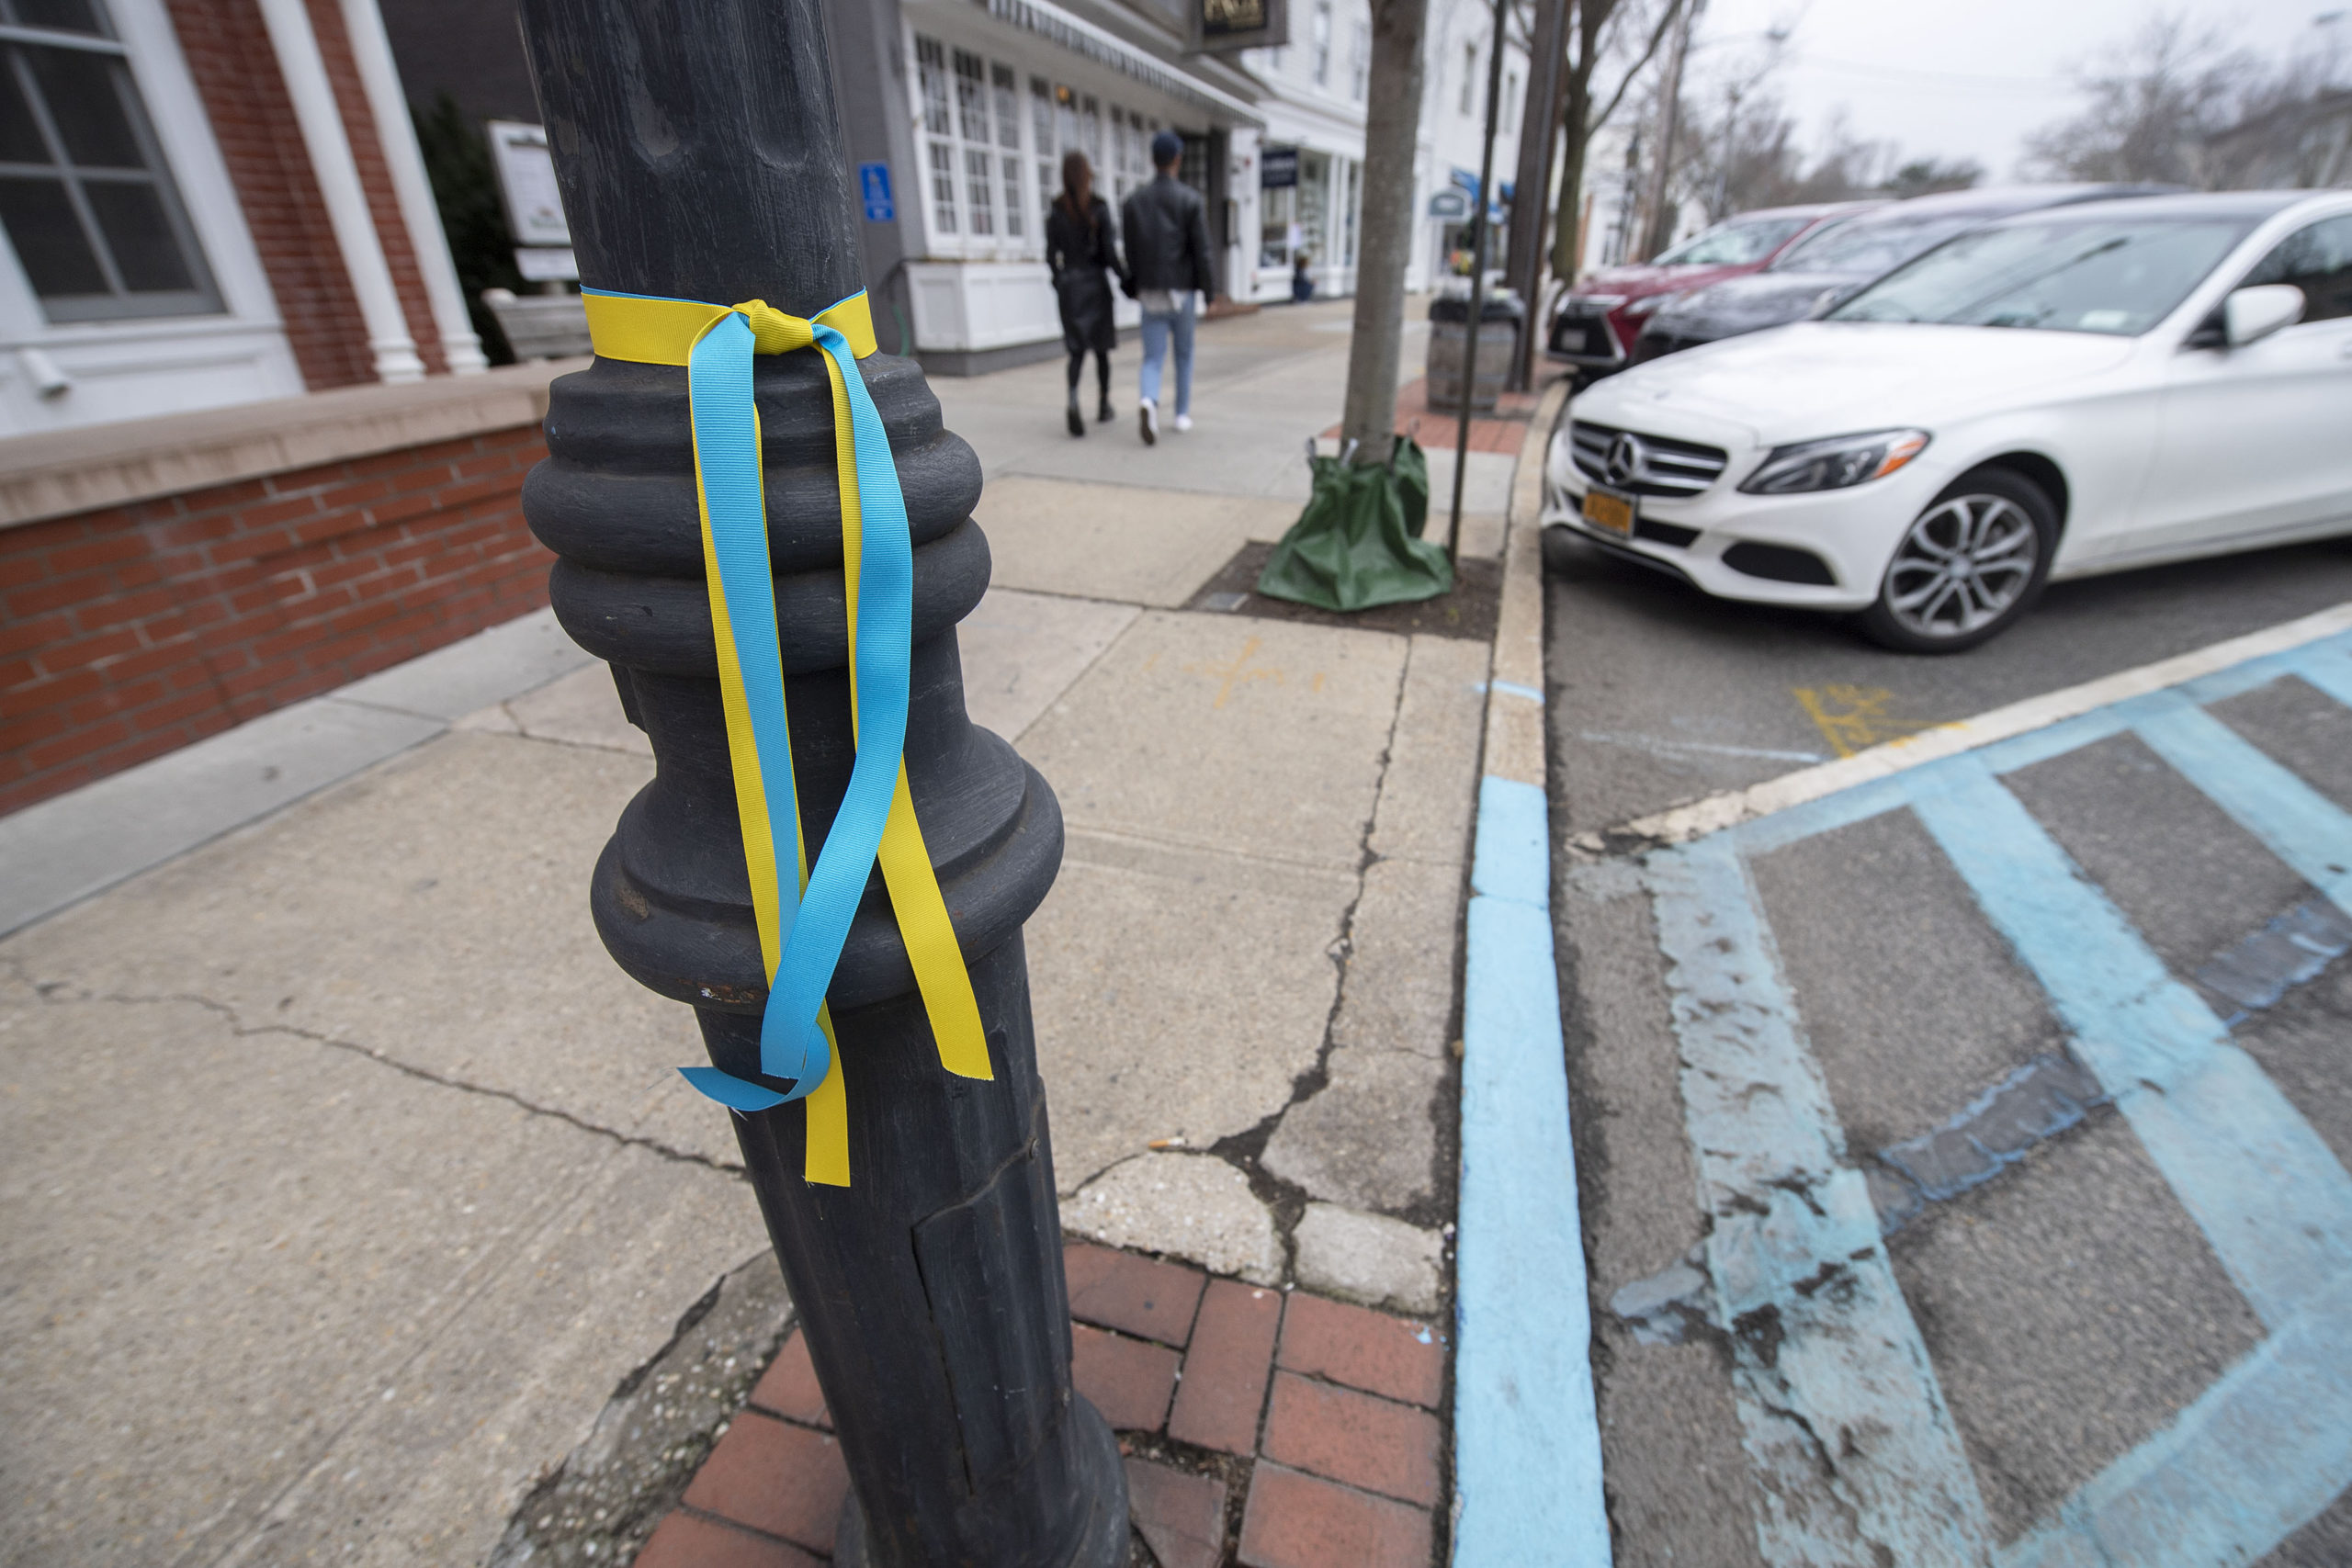 Blue and yellow ribbons were tied around all the street lampposts on Main Street in Sag Harbor in support of Ukraine, as seen on Monday. MICHAEL HELLER